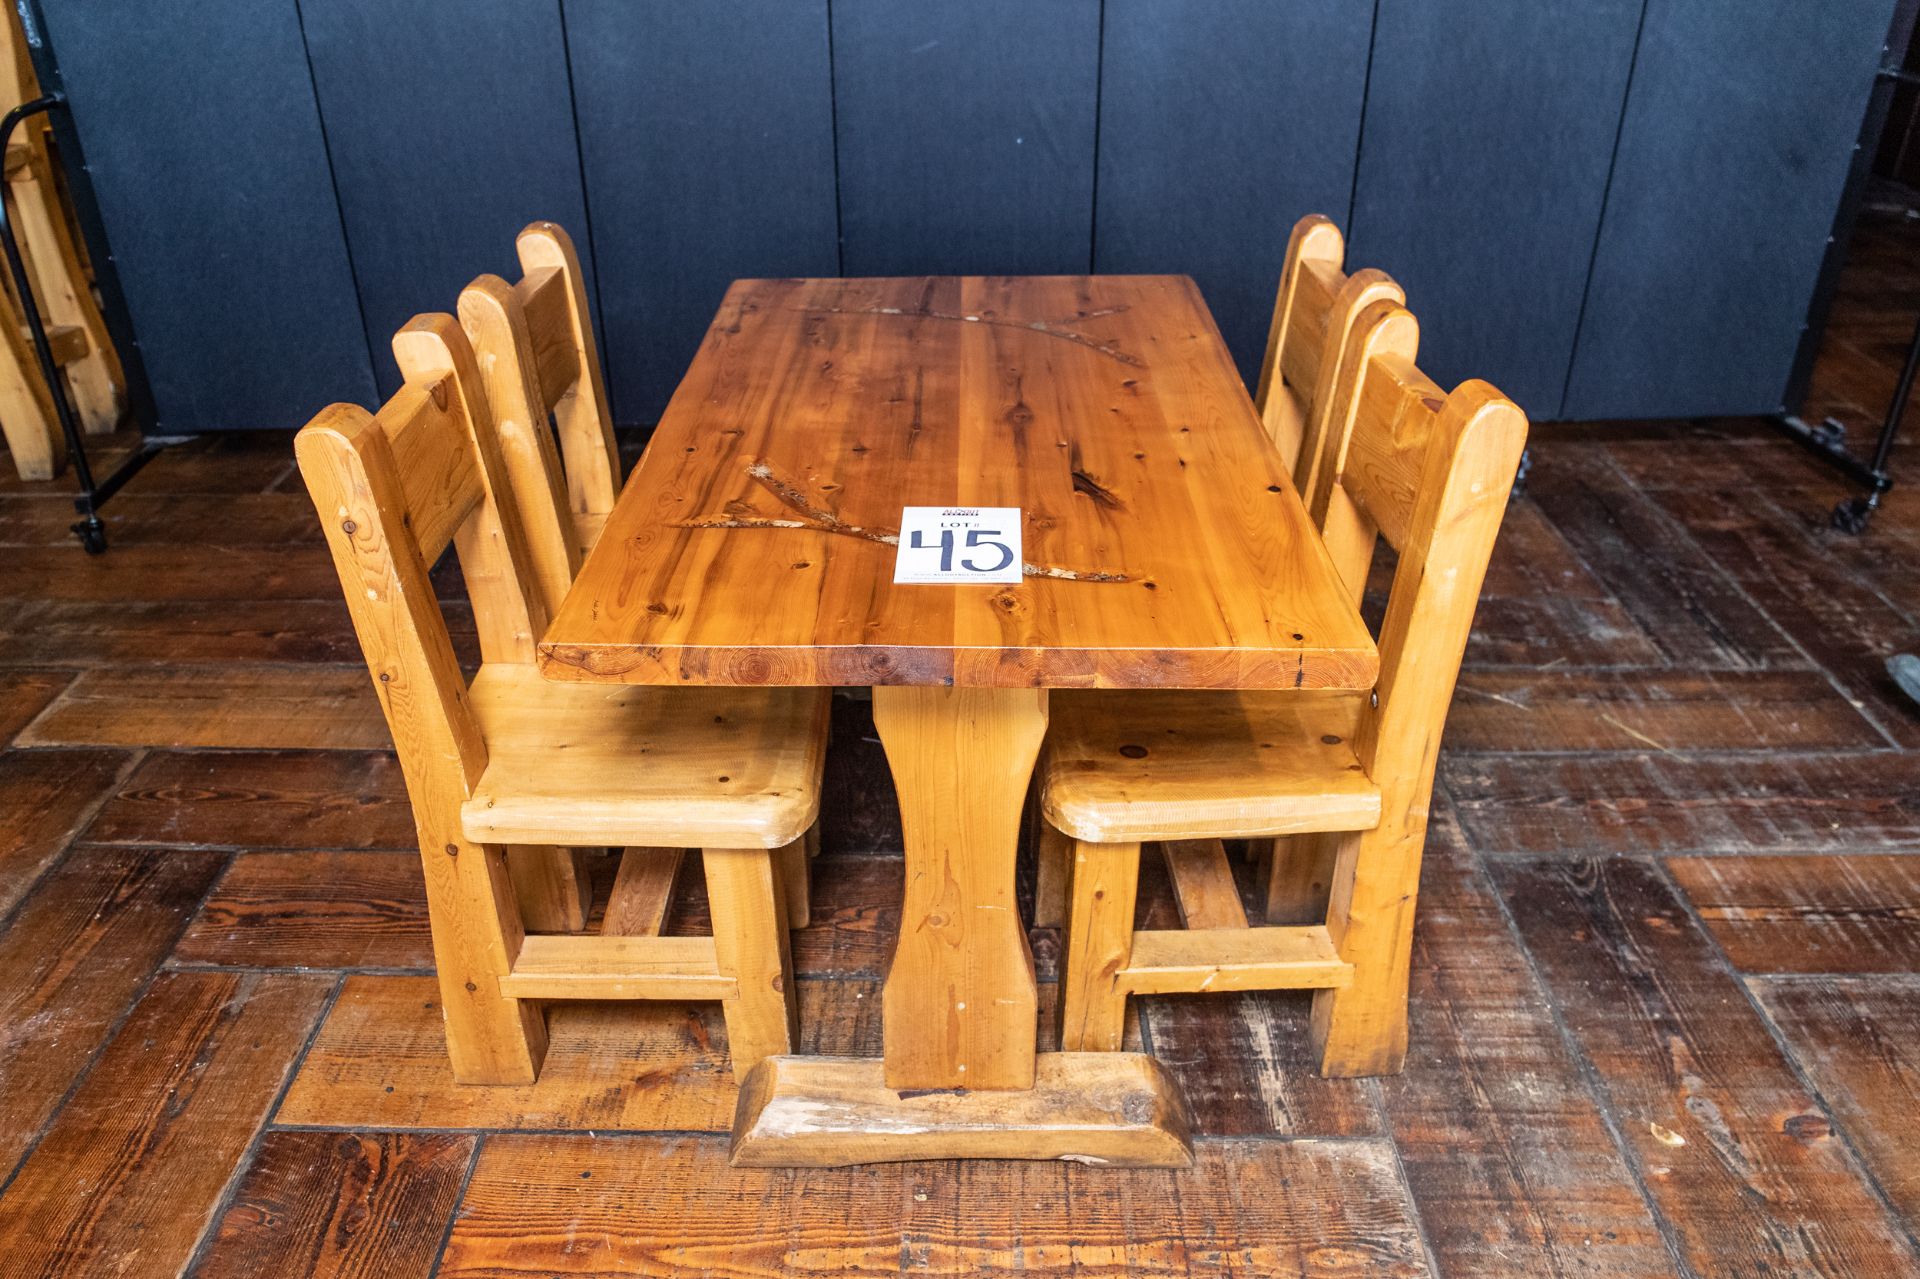 DINING TABLE WITH FOUR CHAIRS - TABLE L 48" W 27 1/2" H 30"